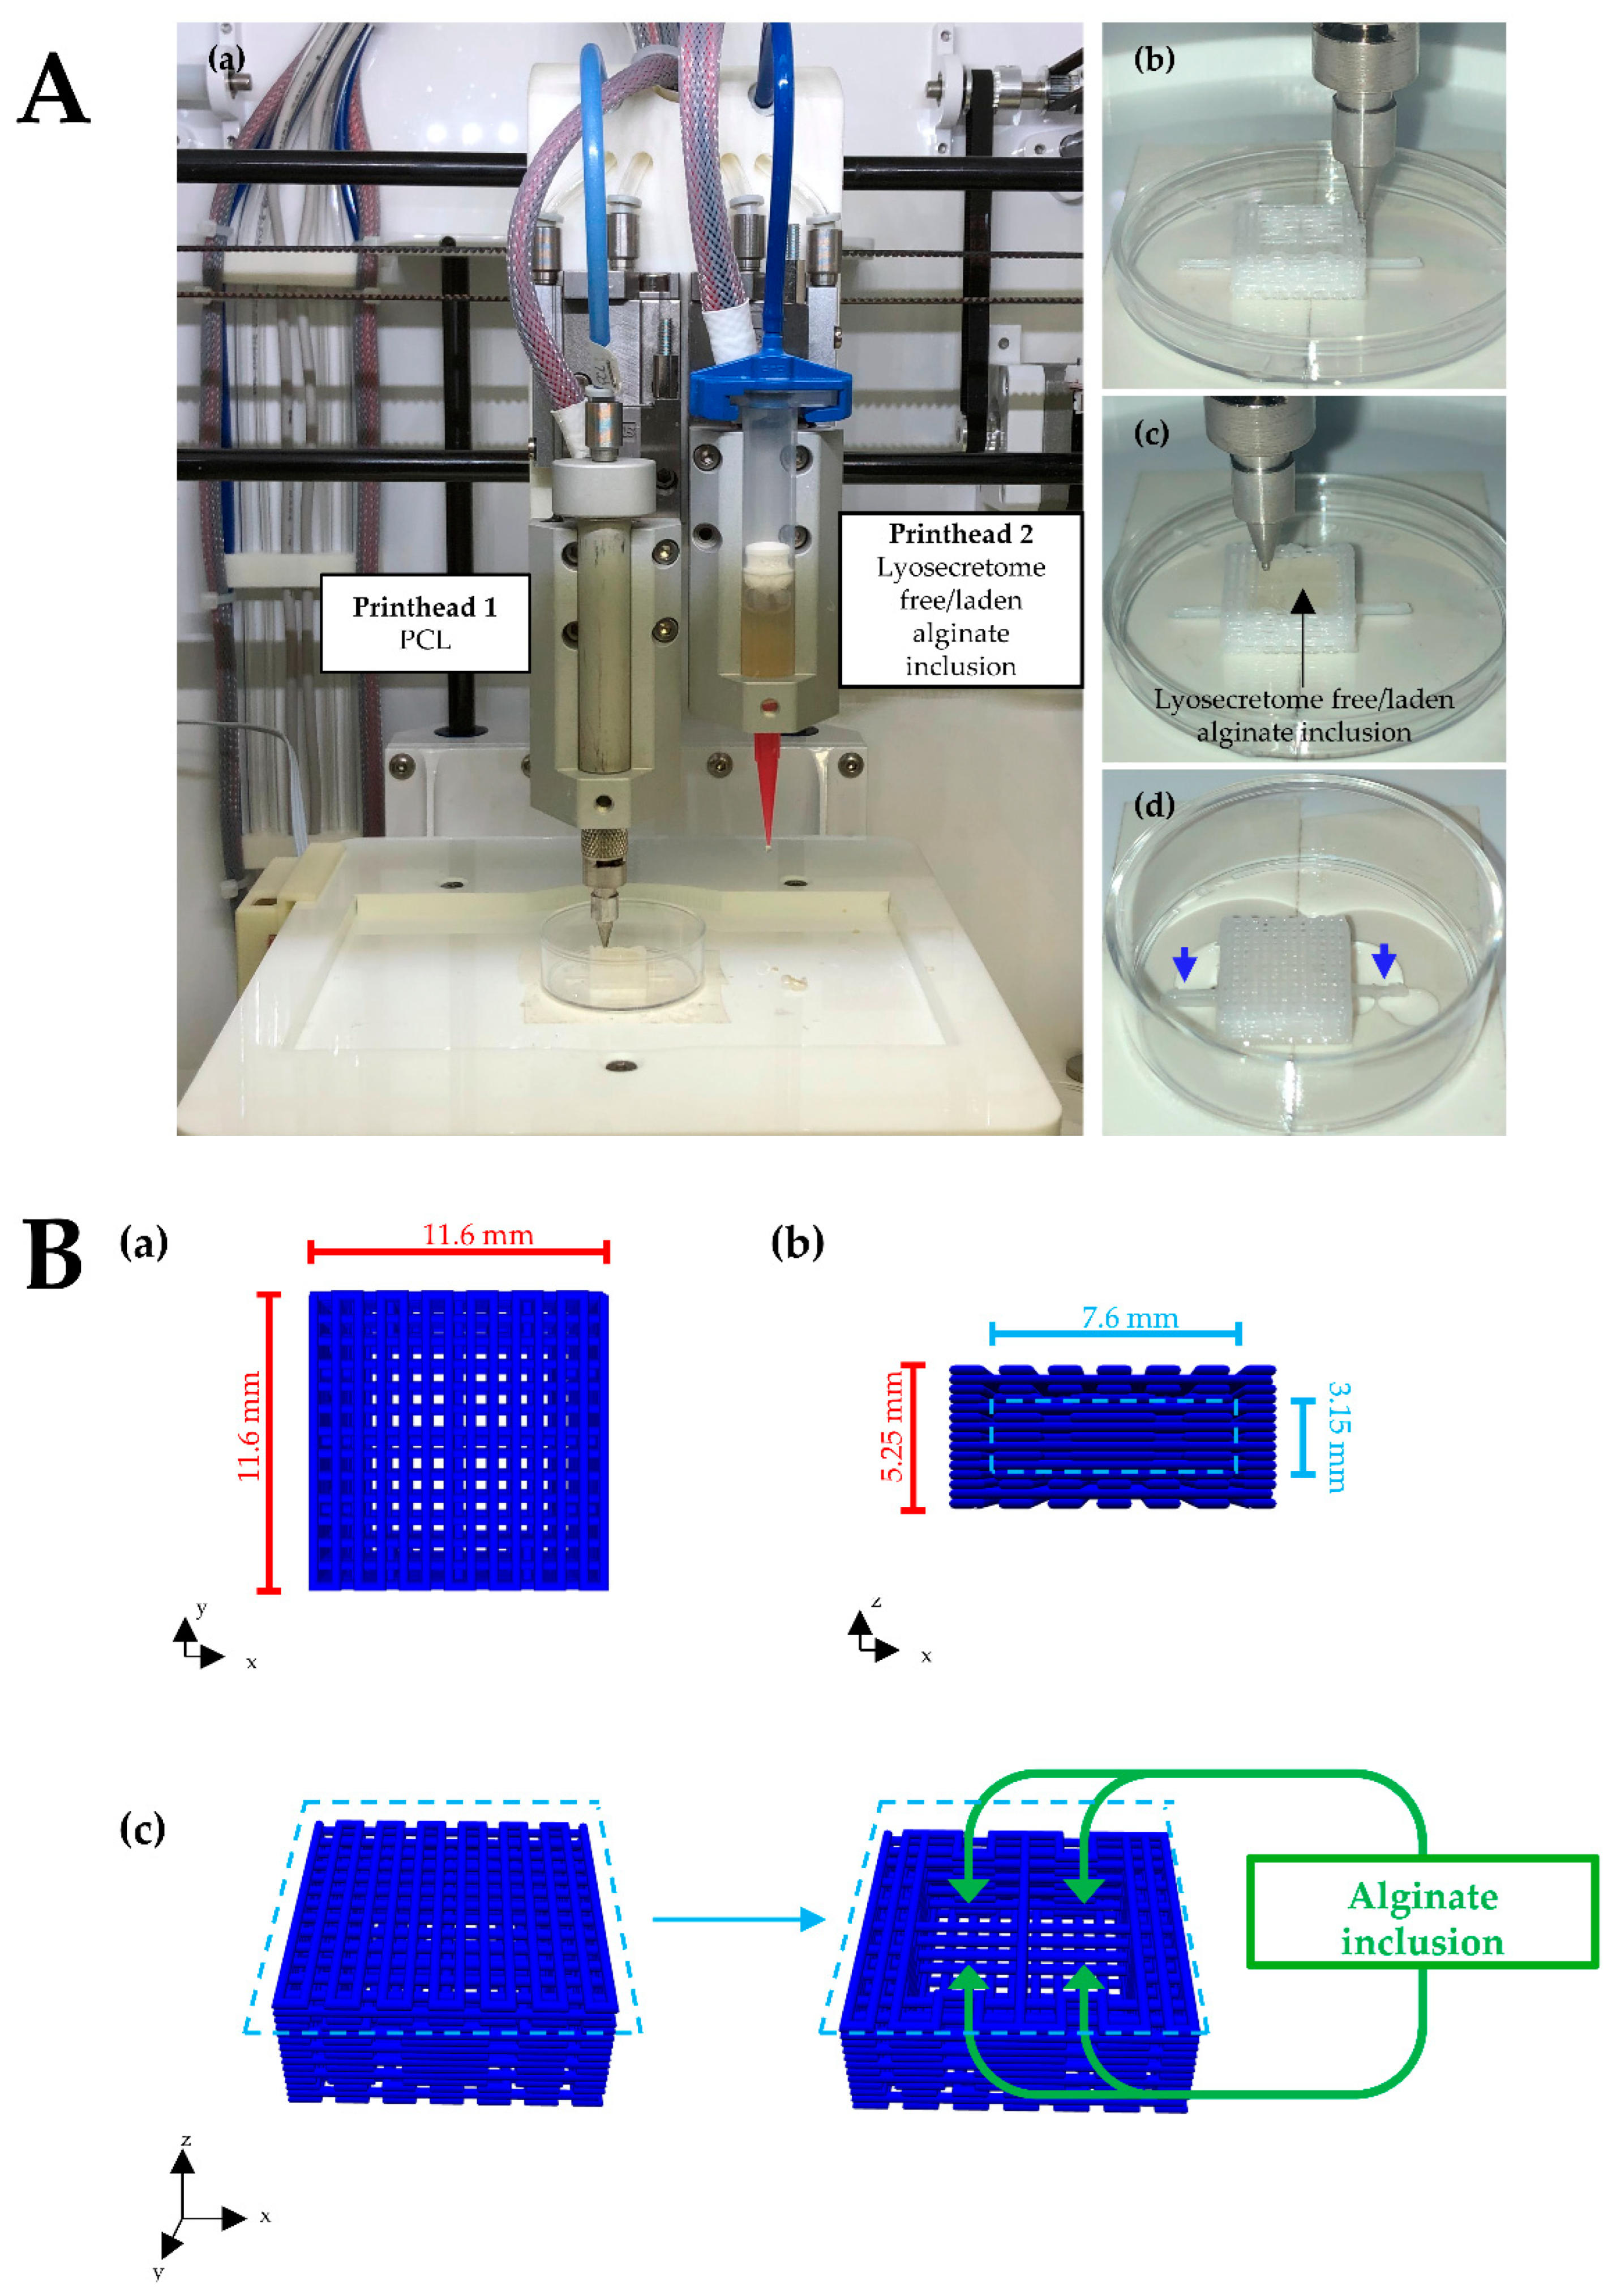 Biomedicines | Free Full-Text | Three-Dimensional Bioprinted Controlled  Release Scaffold Containing Mesenchymal Stem/Stromal Lyosecretome for Bone  Regeneration: Sterile Manufacturing and In Vitro Biological Efficacy